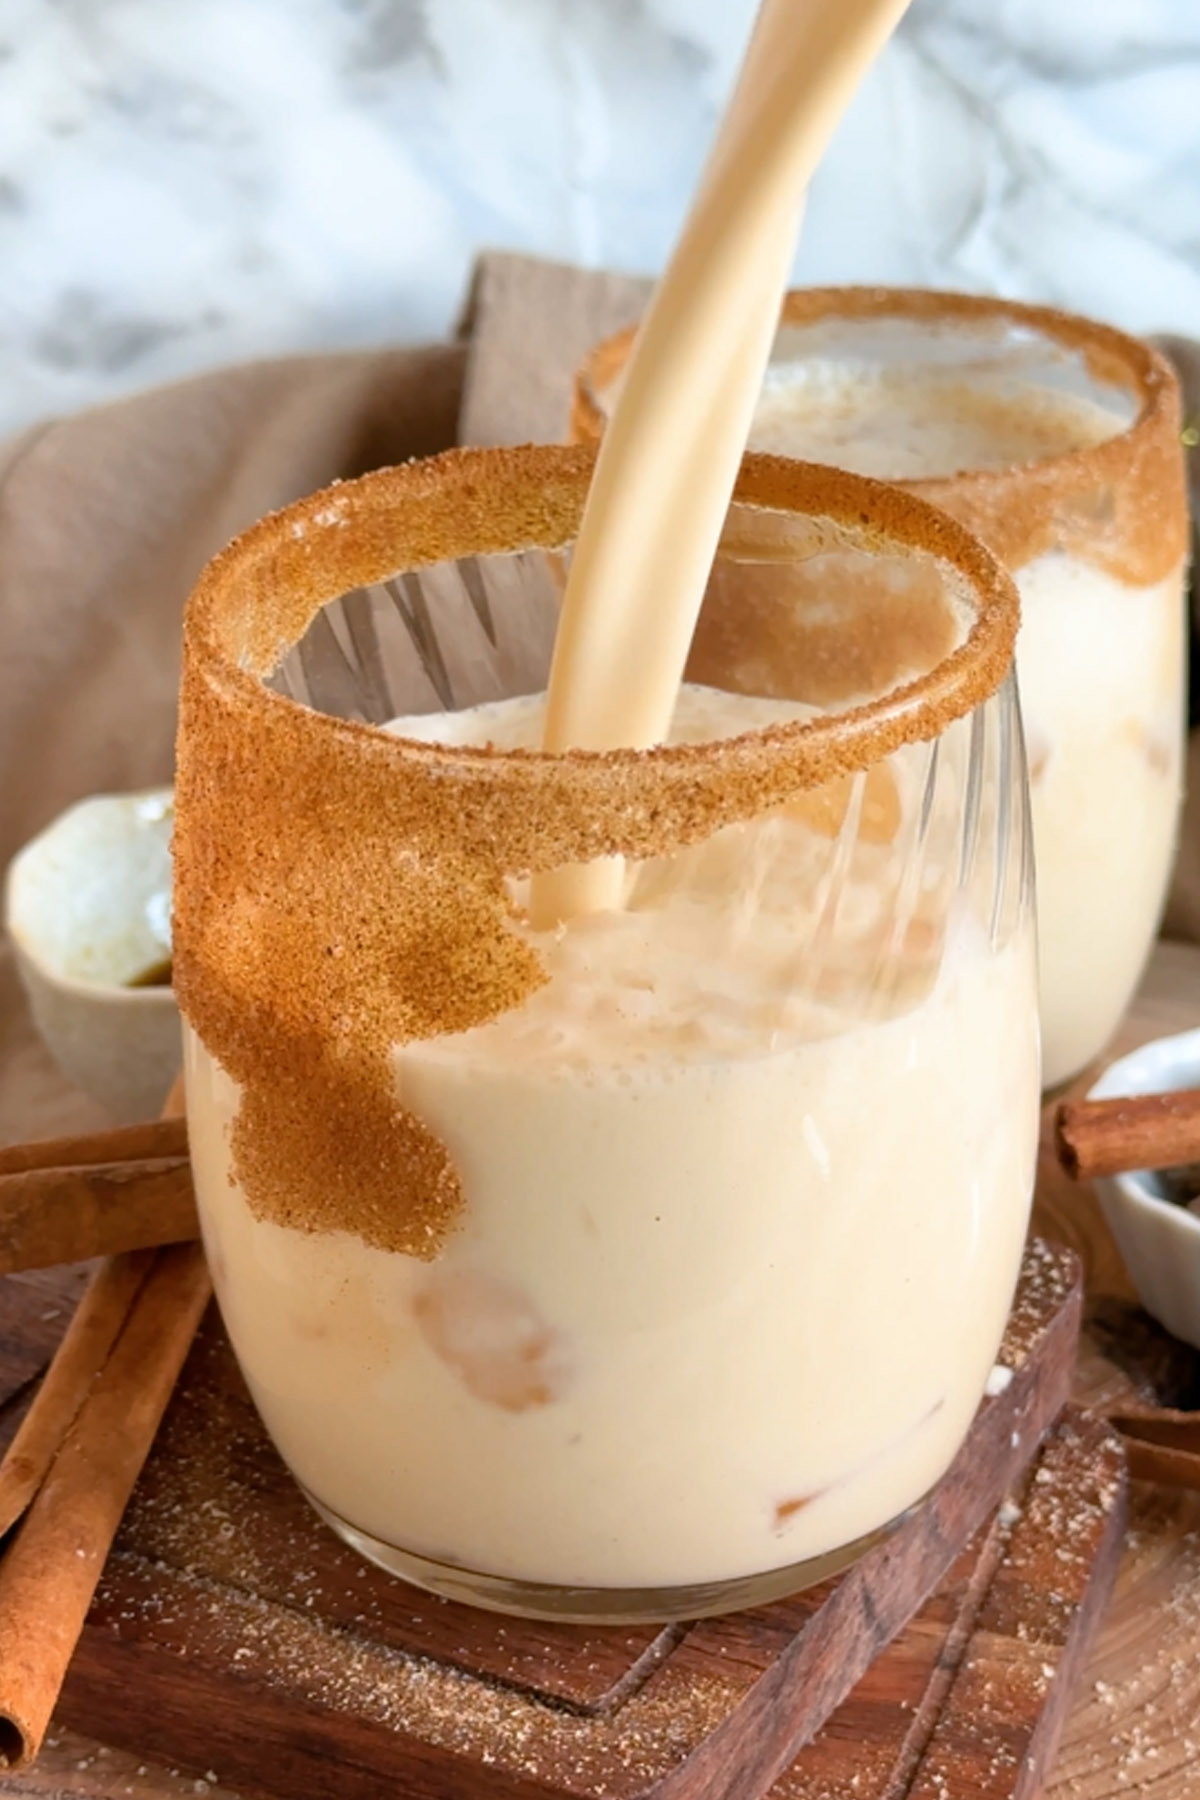 Eggnog is poured into a glass rimmed with cinnamon sugar.